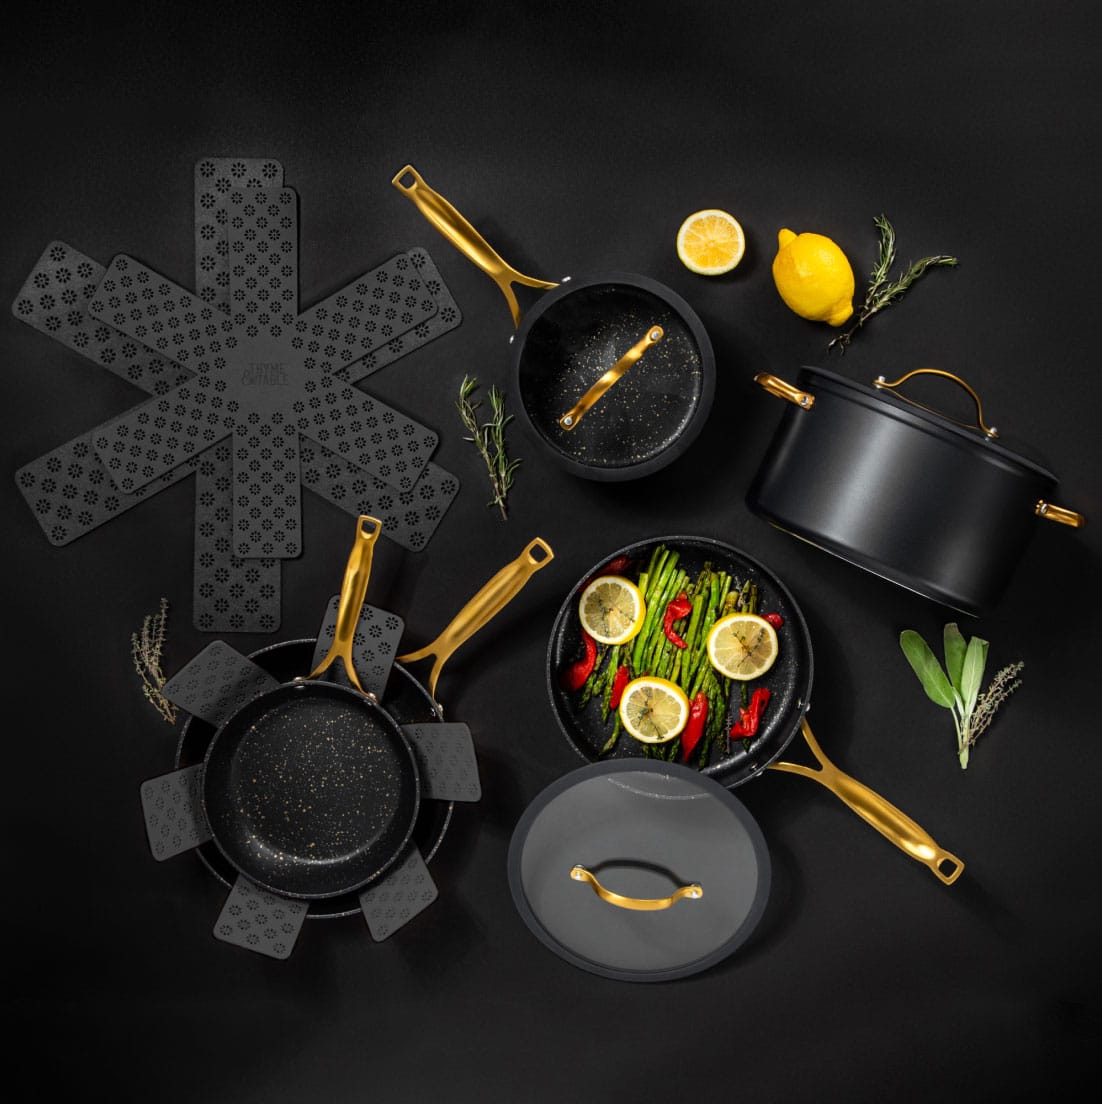 THYME & TABLE Signature Collection / Gold Speckle Edition 12 Piece Cookware  Set